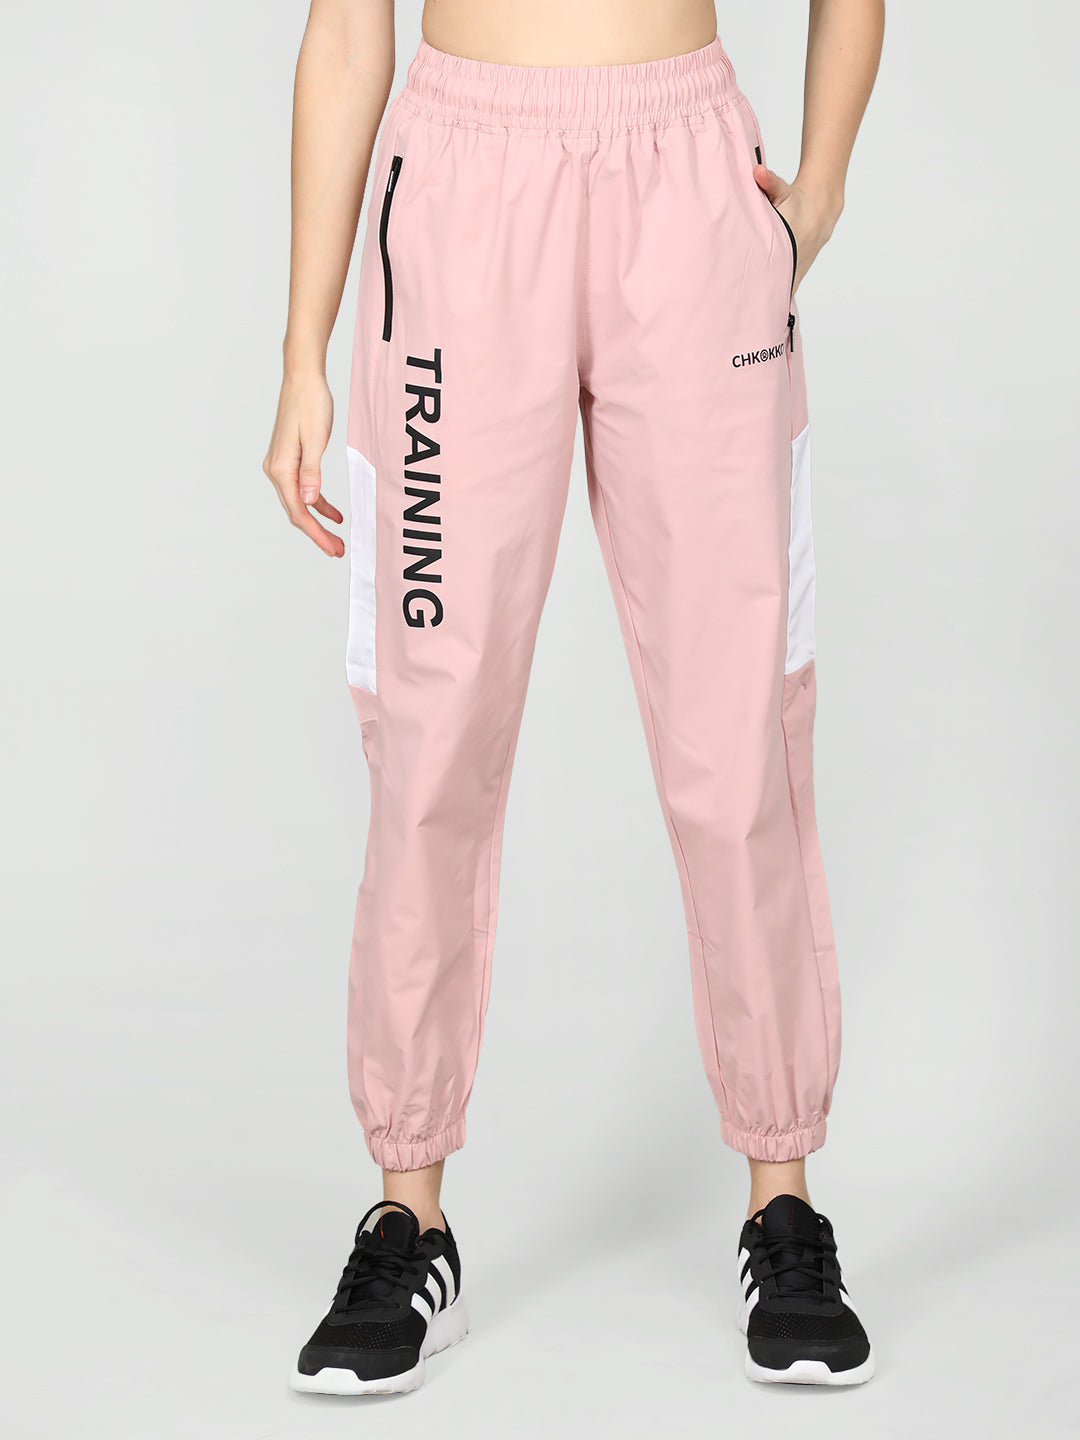 Women's Sports Gym Trackpants Running Lower With Pocket